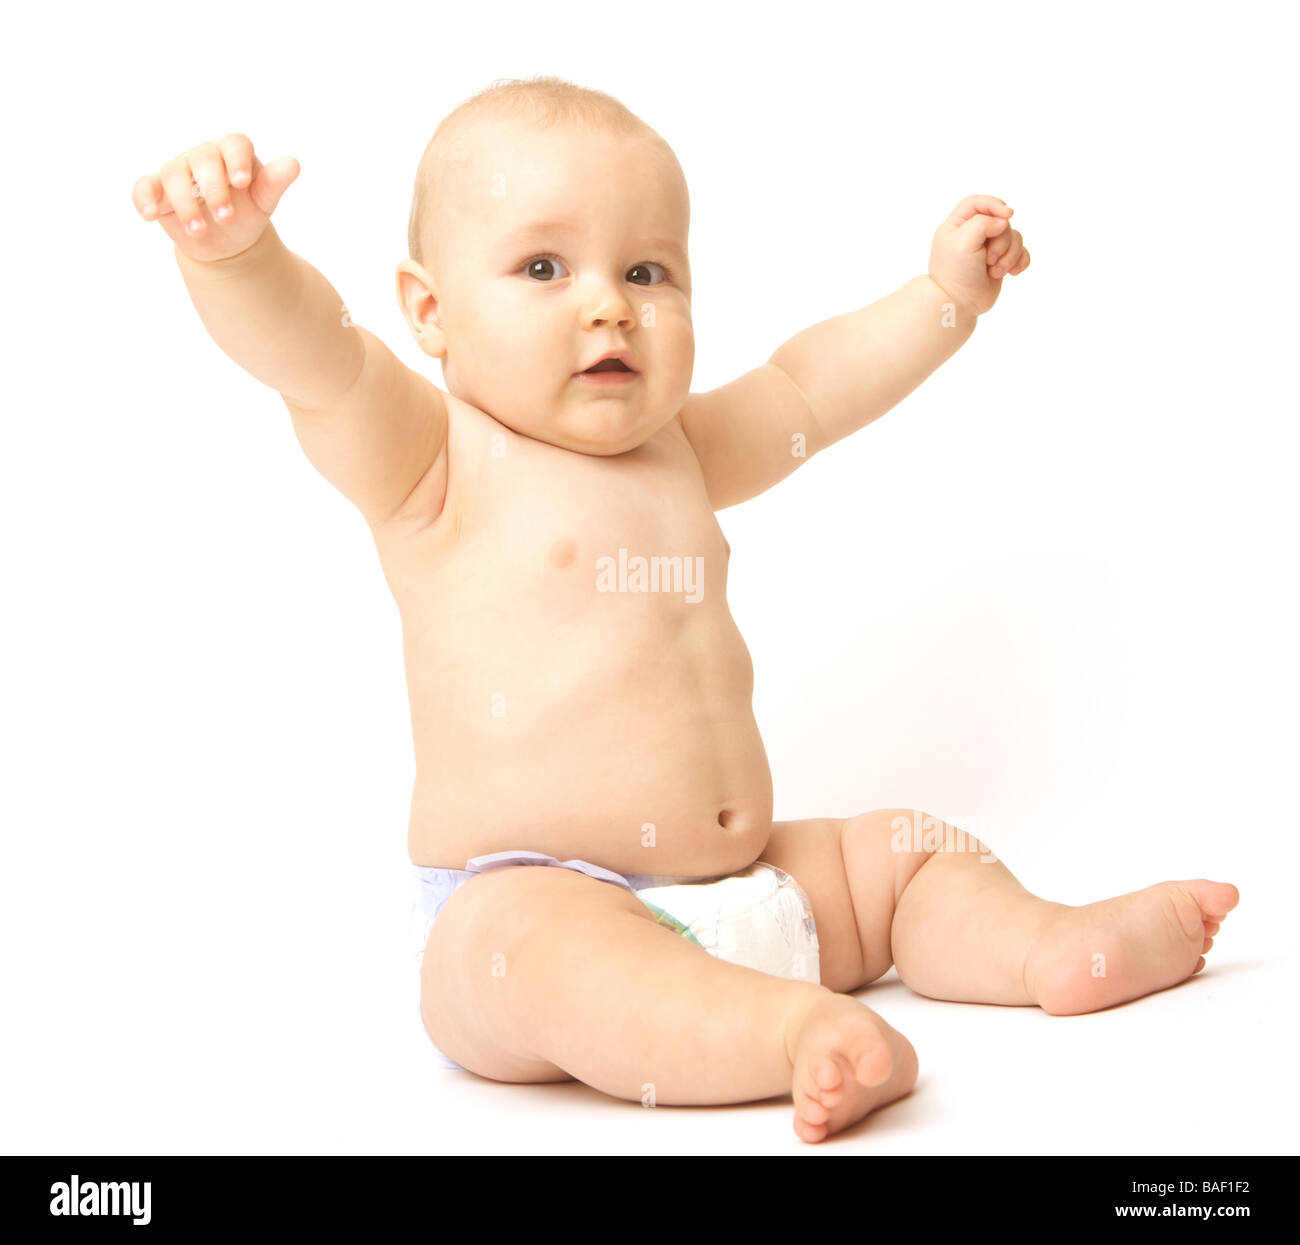 A baby with outstretched arms Stock Photo